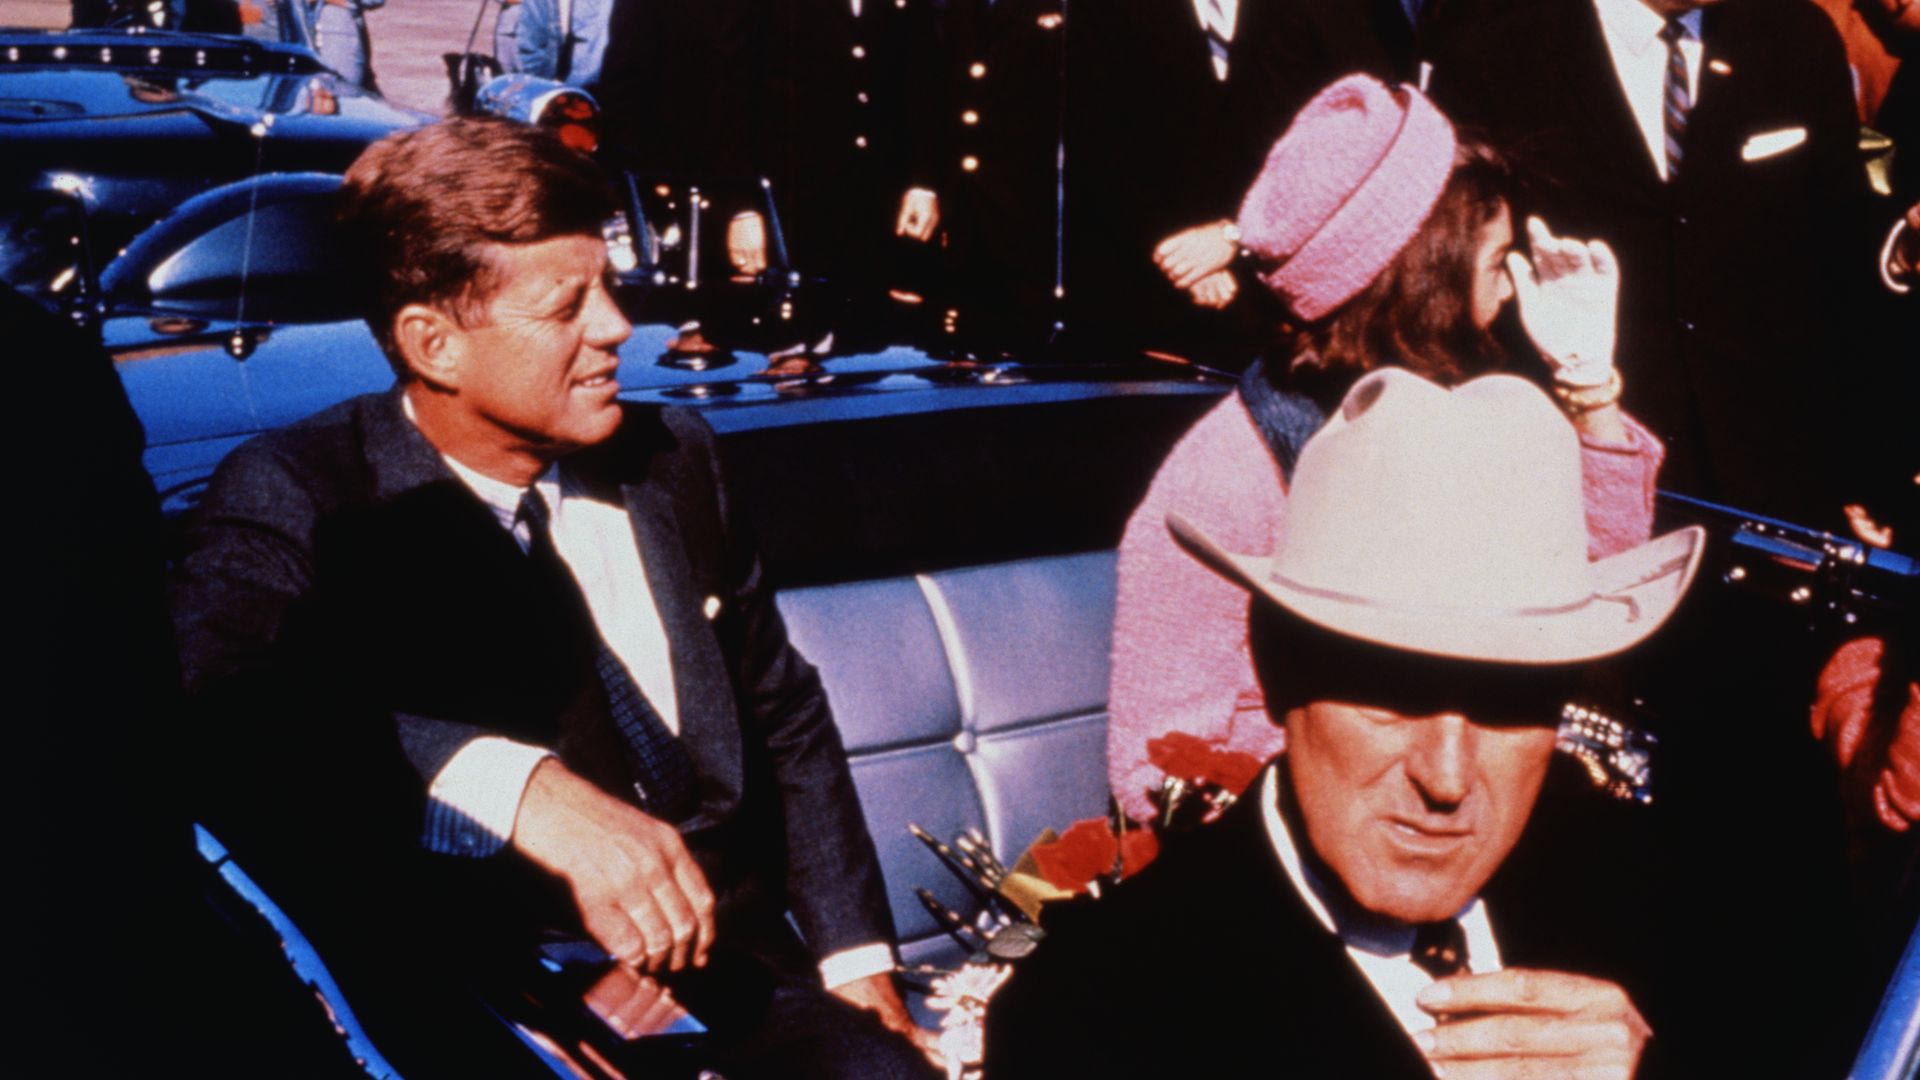 Texas Governor John Connally adjusts his tie (foreground) as US President John F Kennedy (left) & First Lady Jacqueline Kennedy (in pink) settled in rear seats, prepared for motorcade into city. 